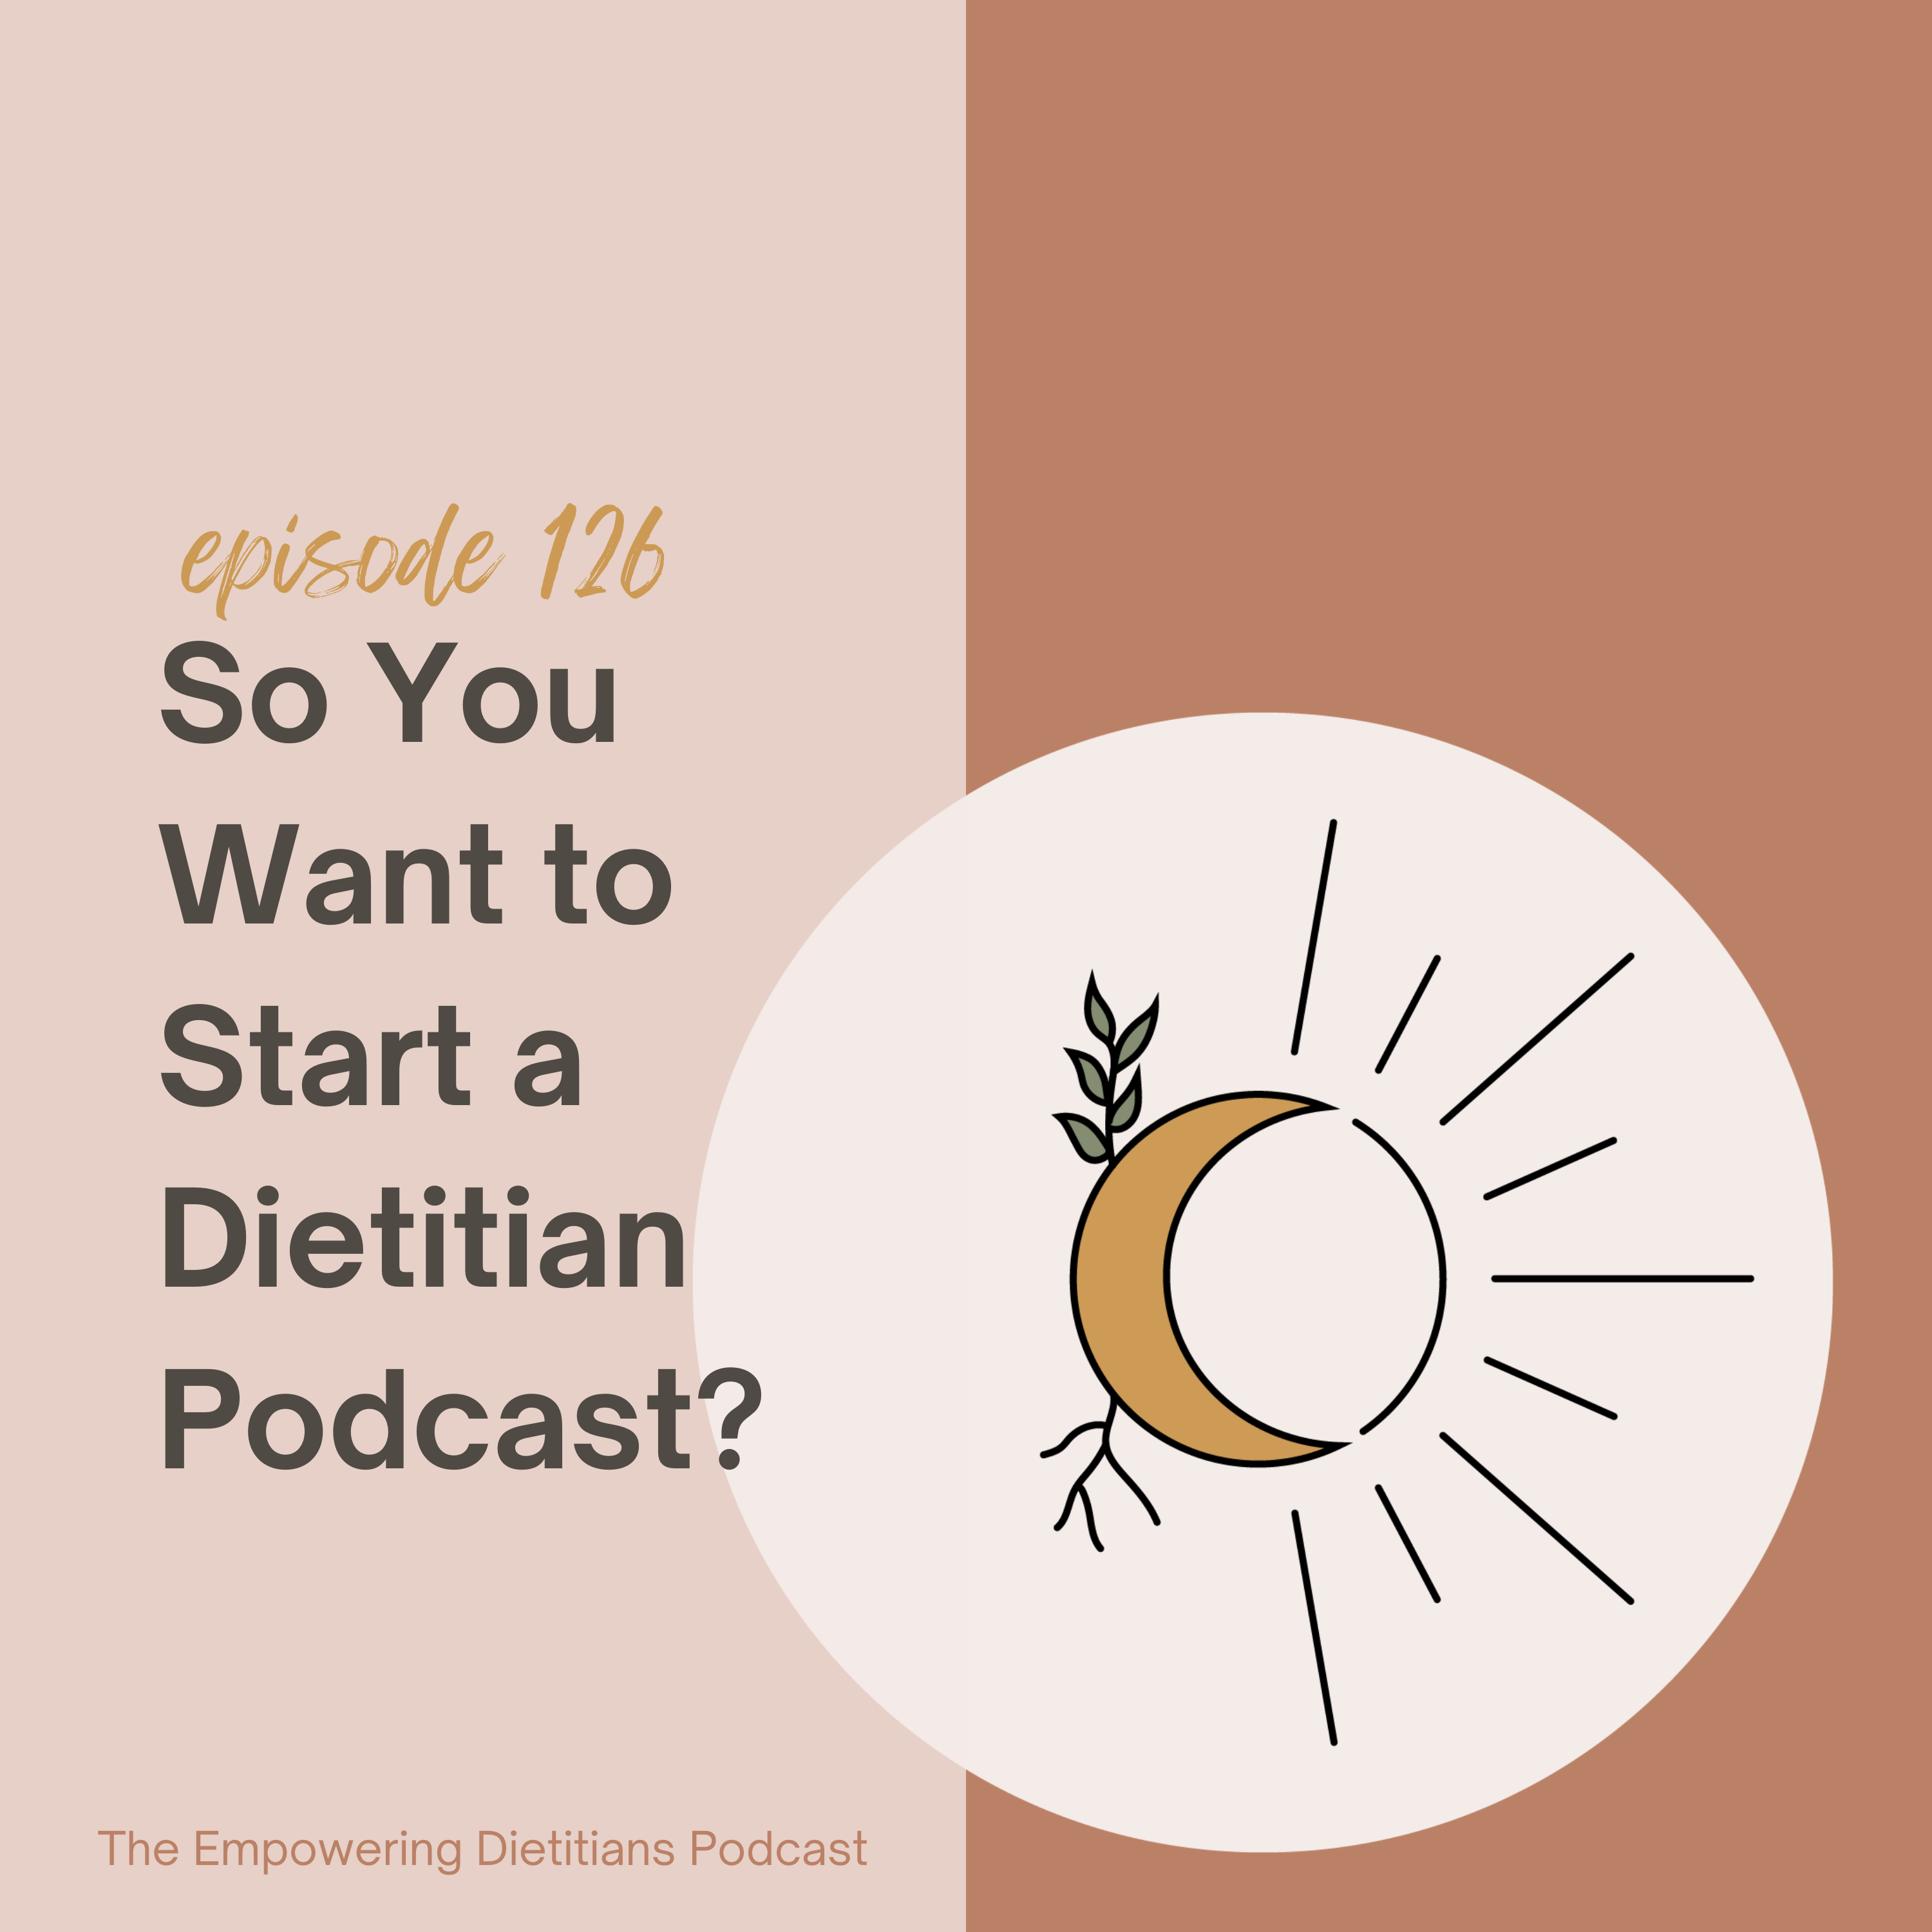 so you want to start a dietitian podcast